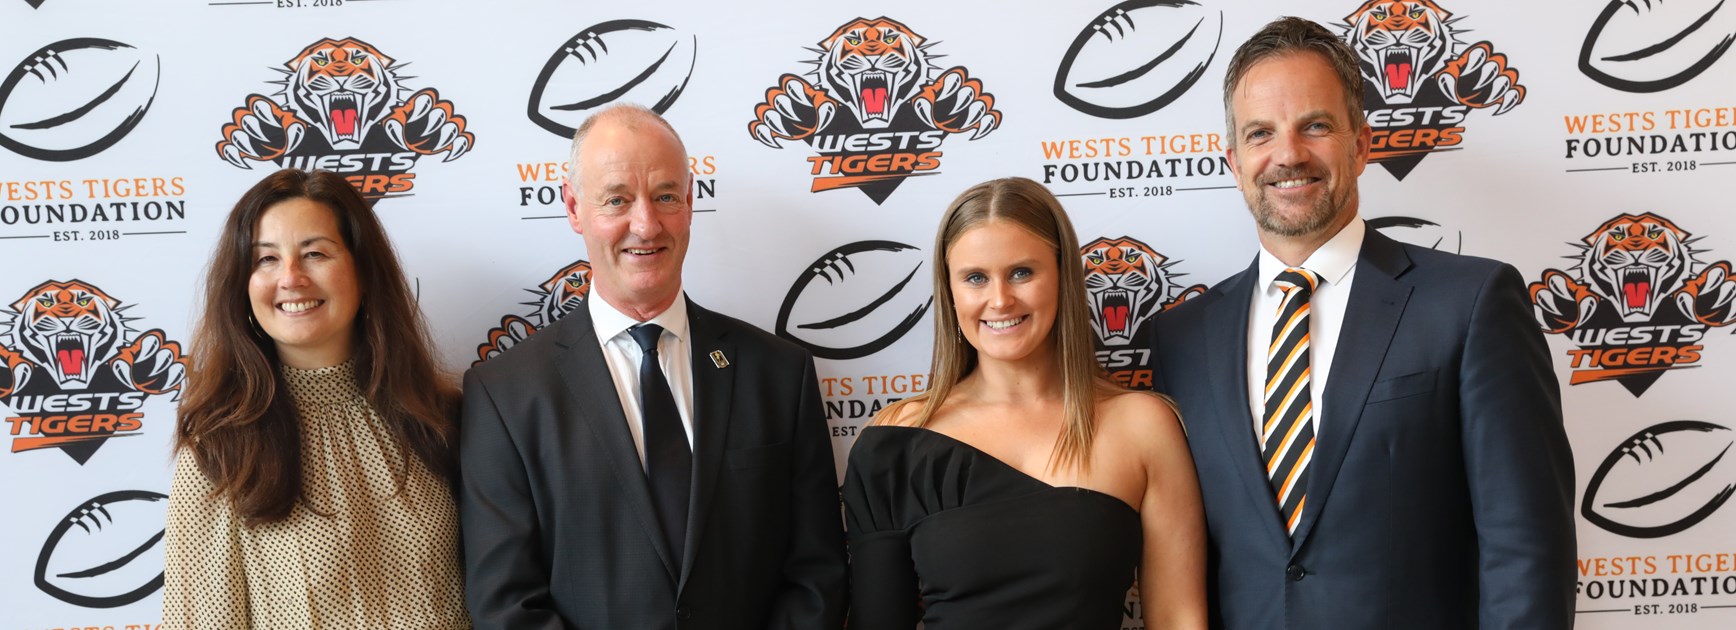 Left to Right: Wests Tigers Chair Marina Go, Men of League Foundation CEO Stephen Lowndes, Men of League Foundation National Manager – Wellbeing Jessica Macartney, Wests Tigers CEO Justin Pascoe.